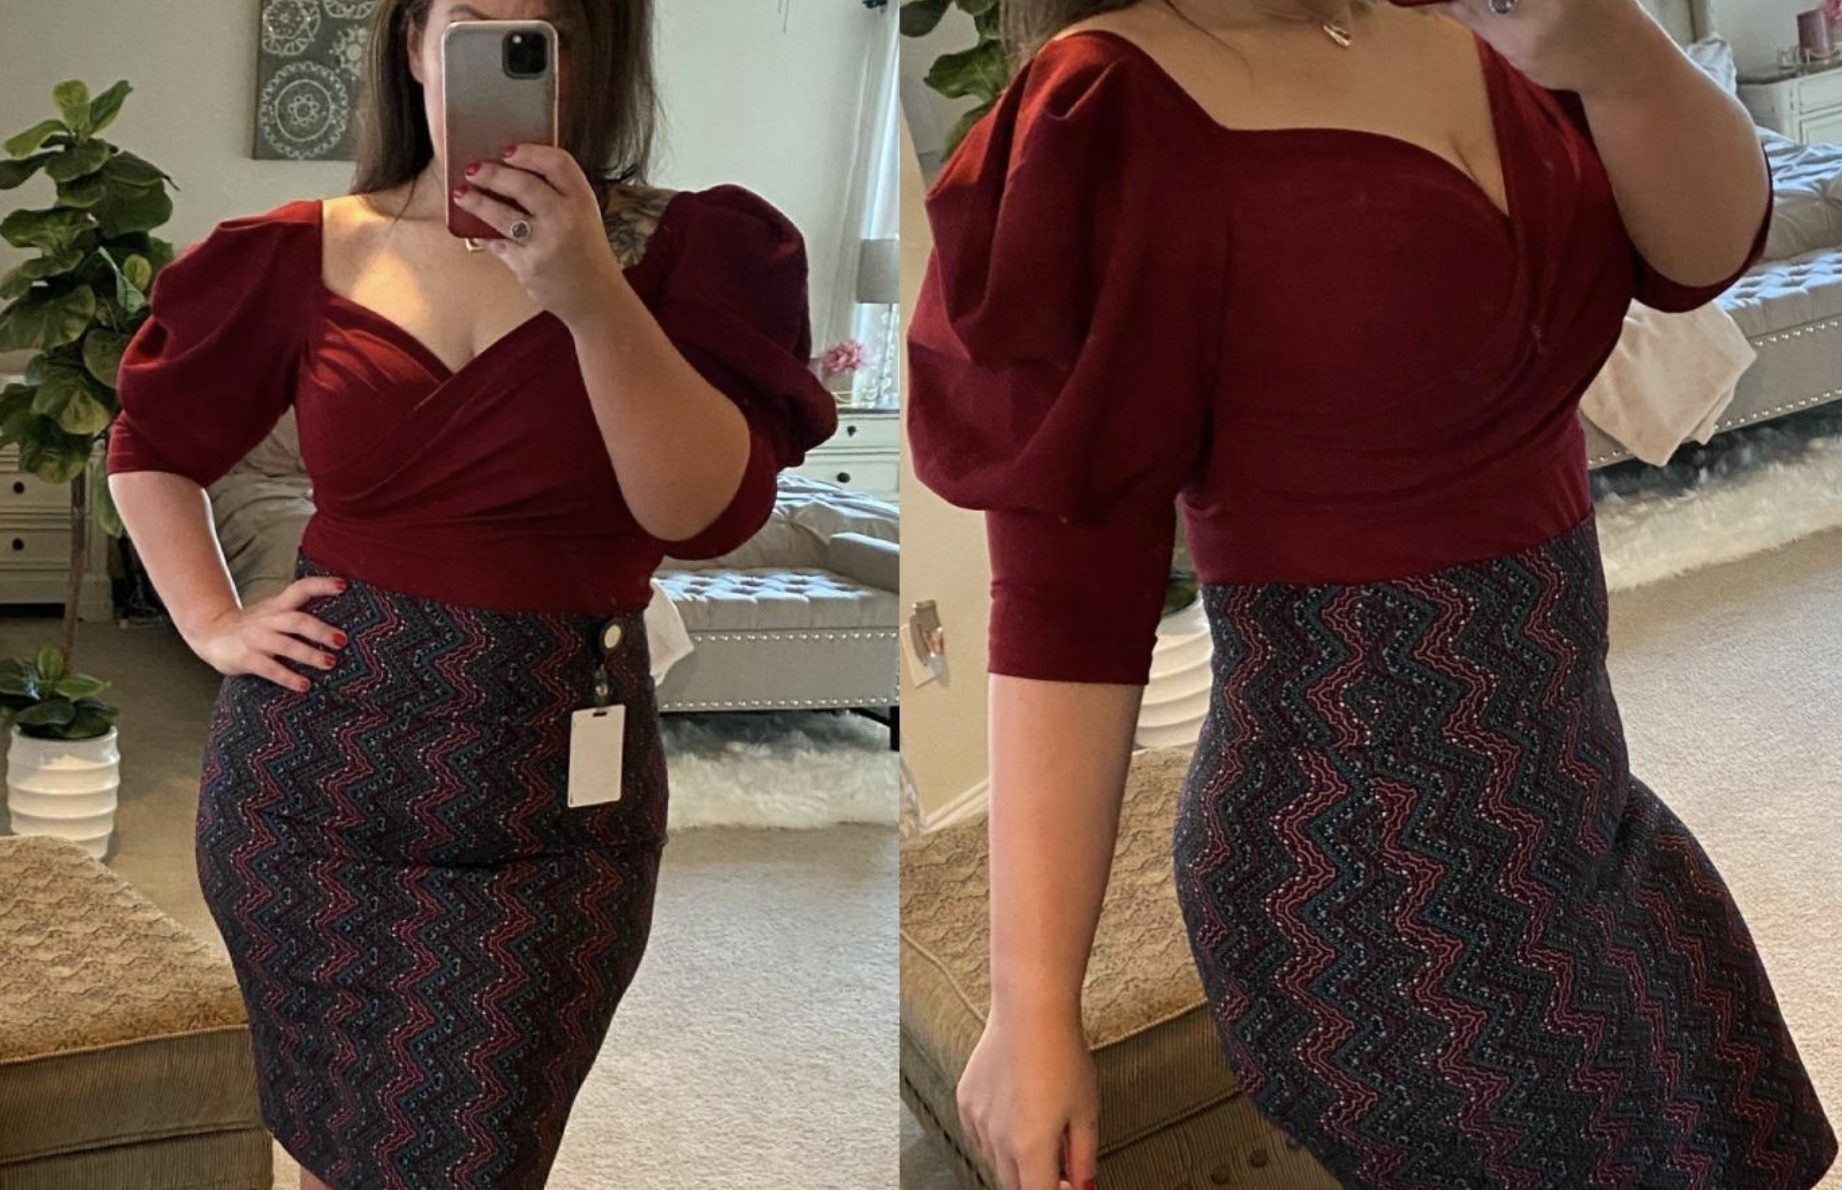 reviewer wearing dark red top tucked into a skirt